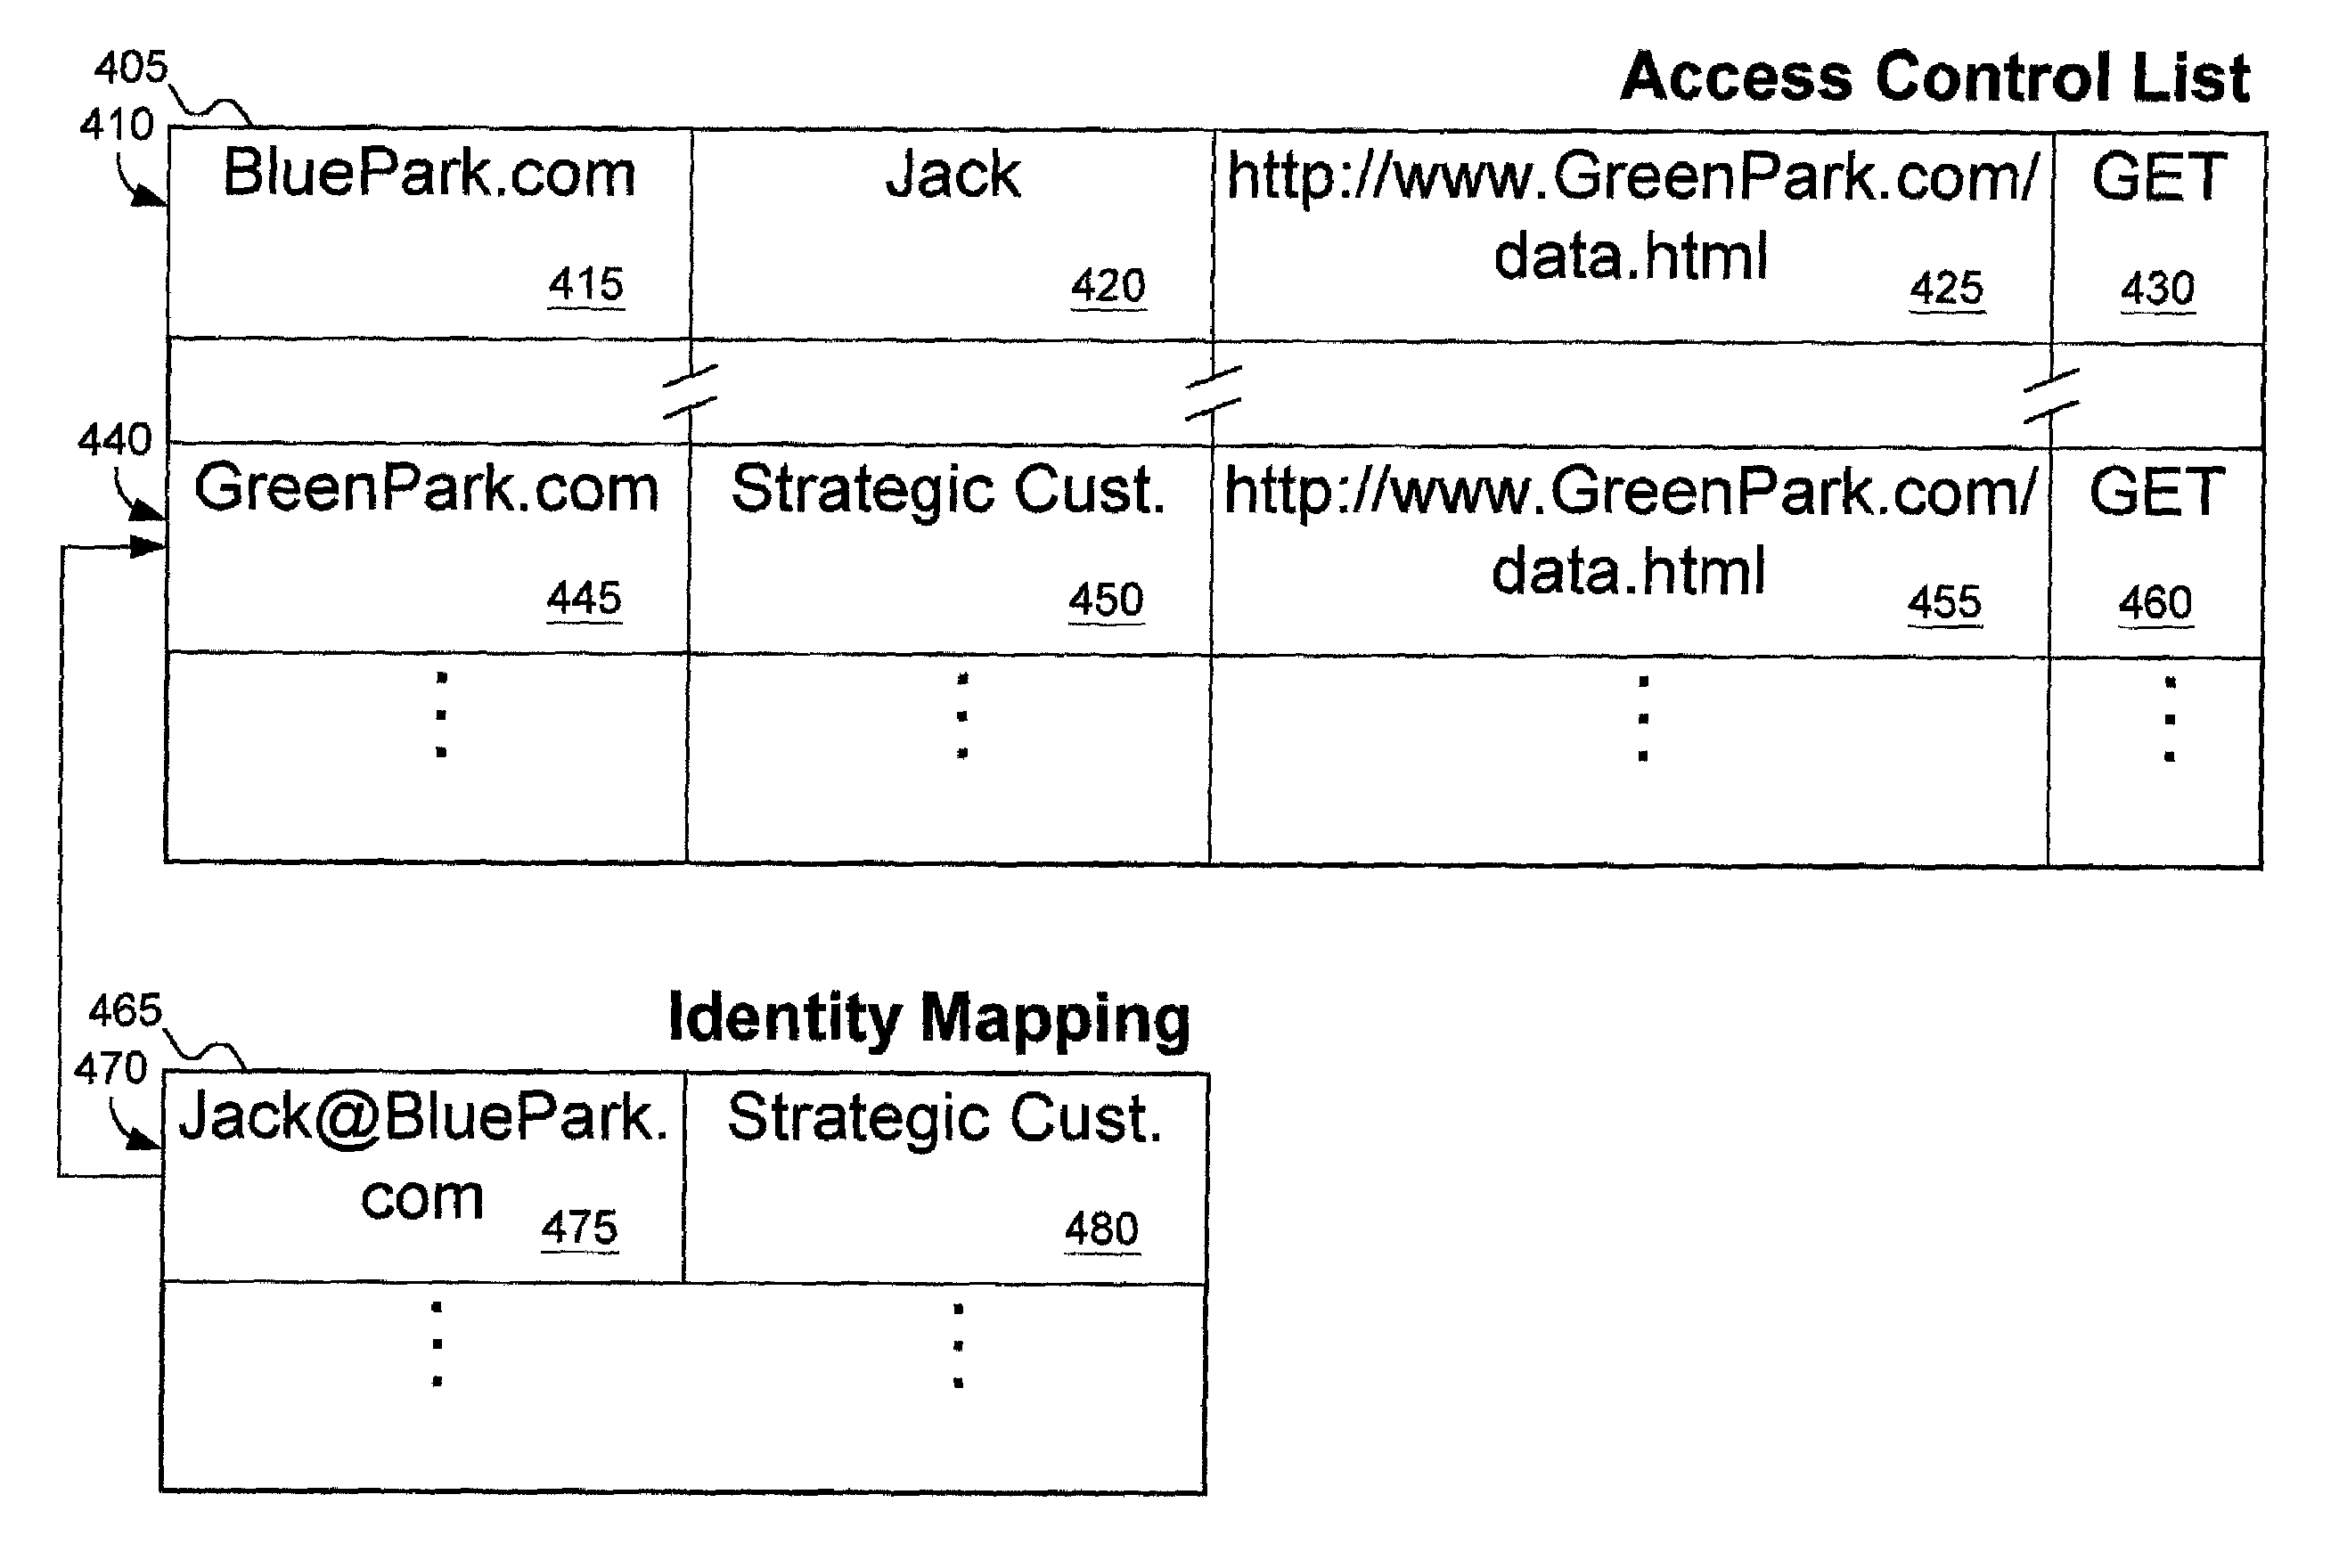 Cross domain authentication and security services using proxies for HTTP access